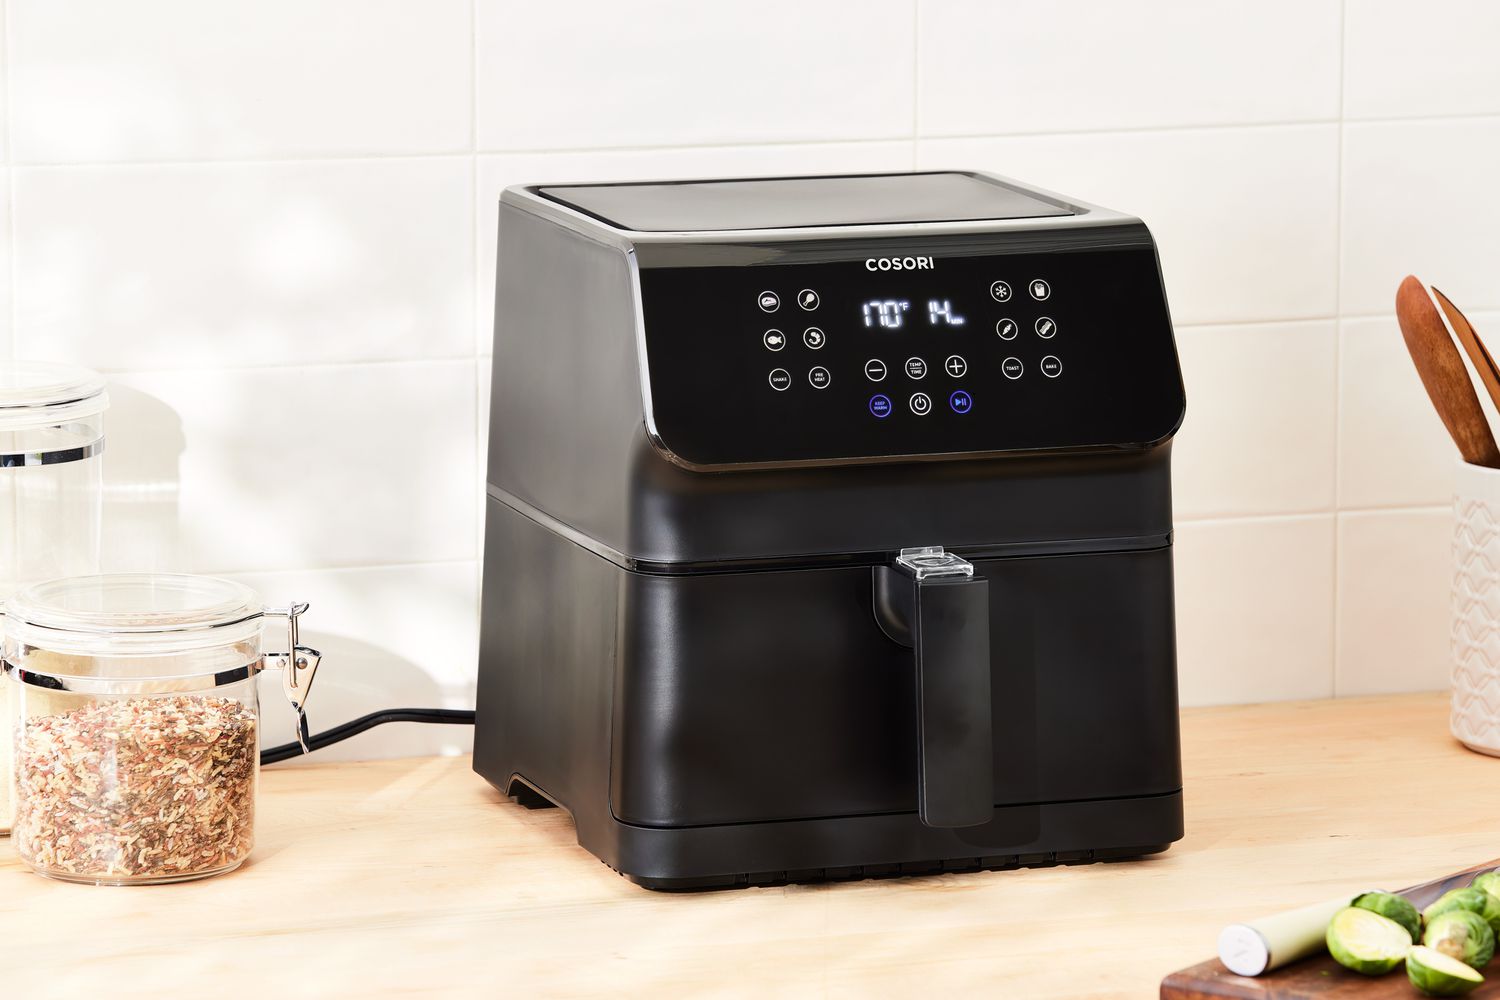 Cosori VeSync Pro II Smart Air Fryer displayed on a wood surface in front of white tile